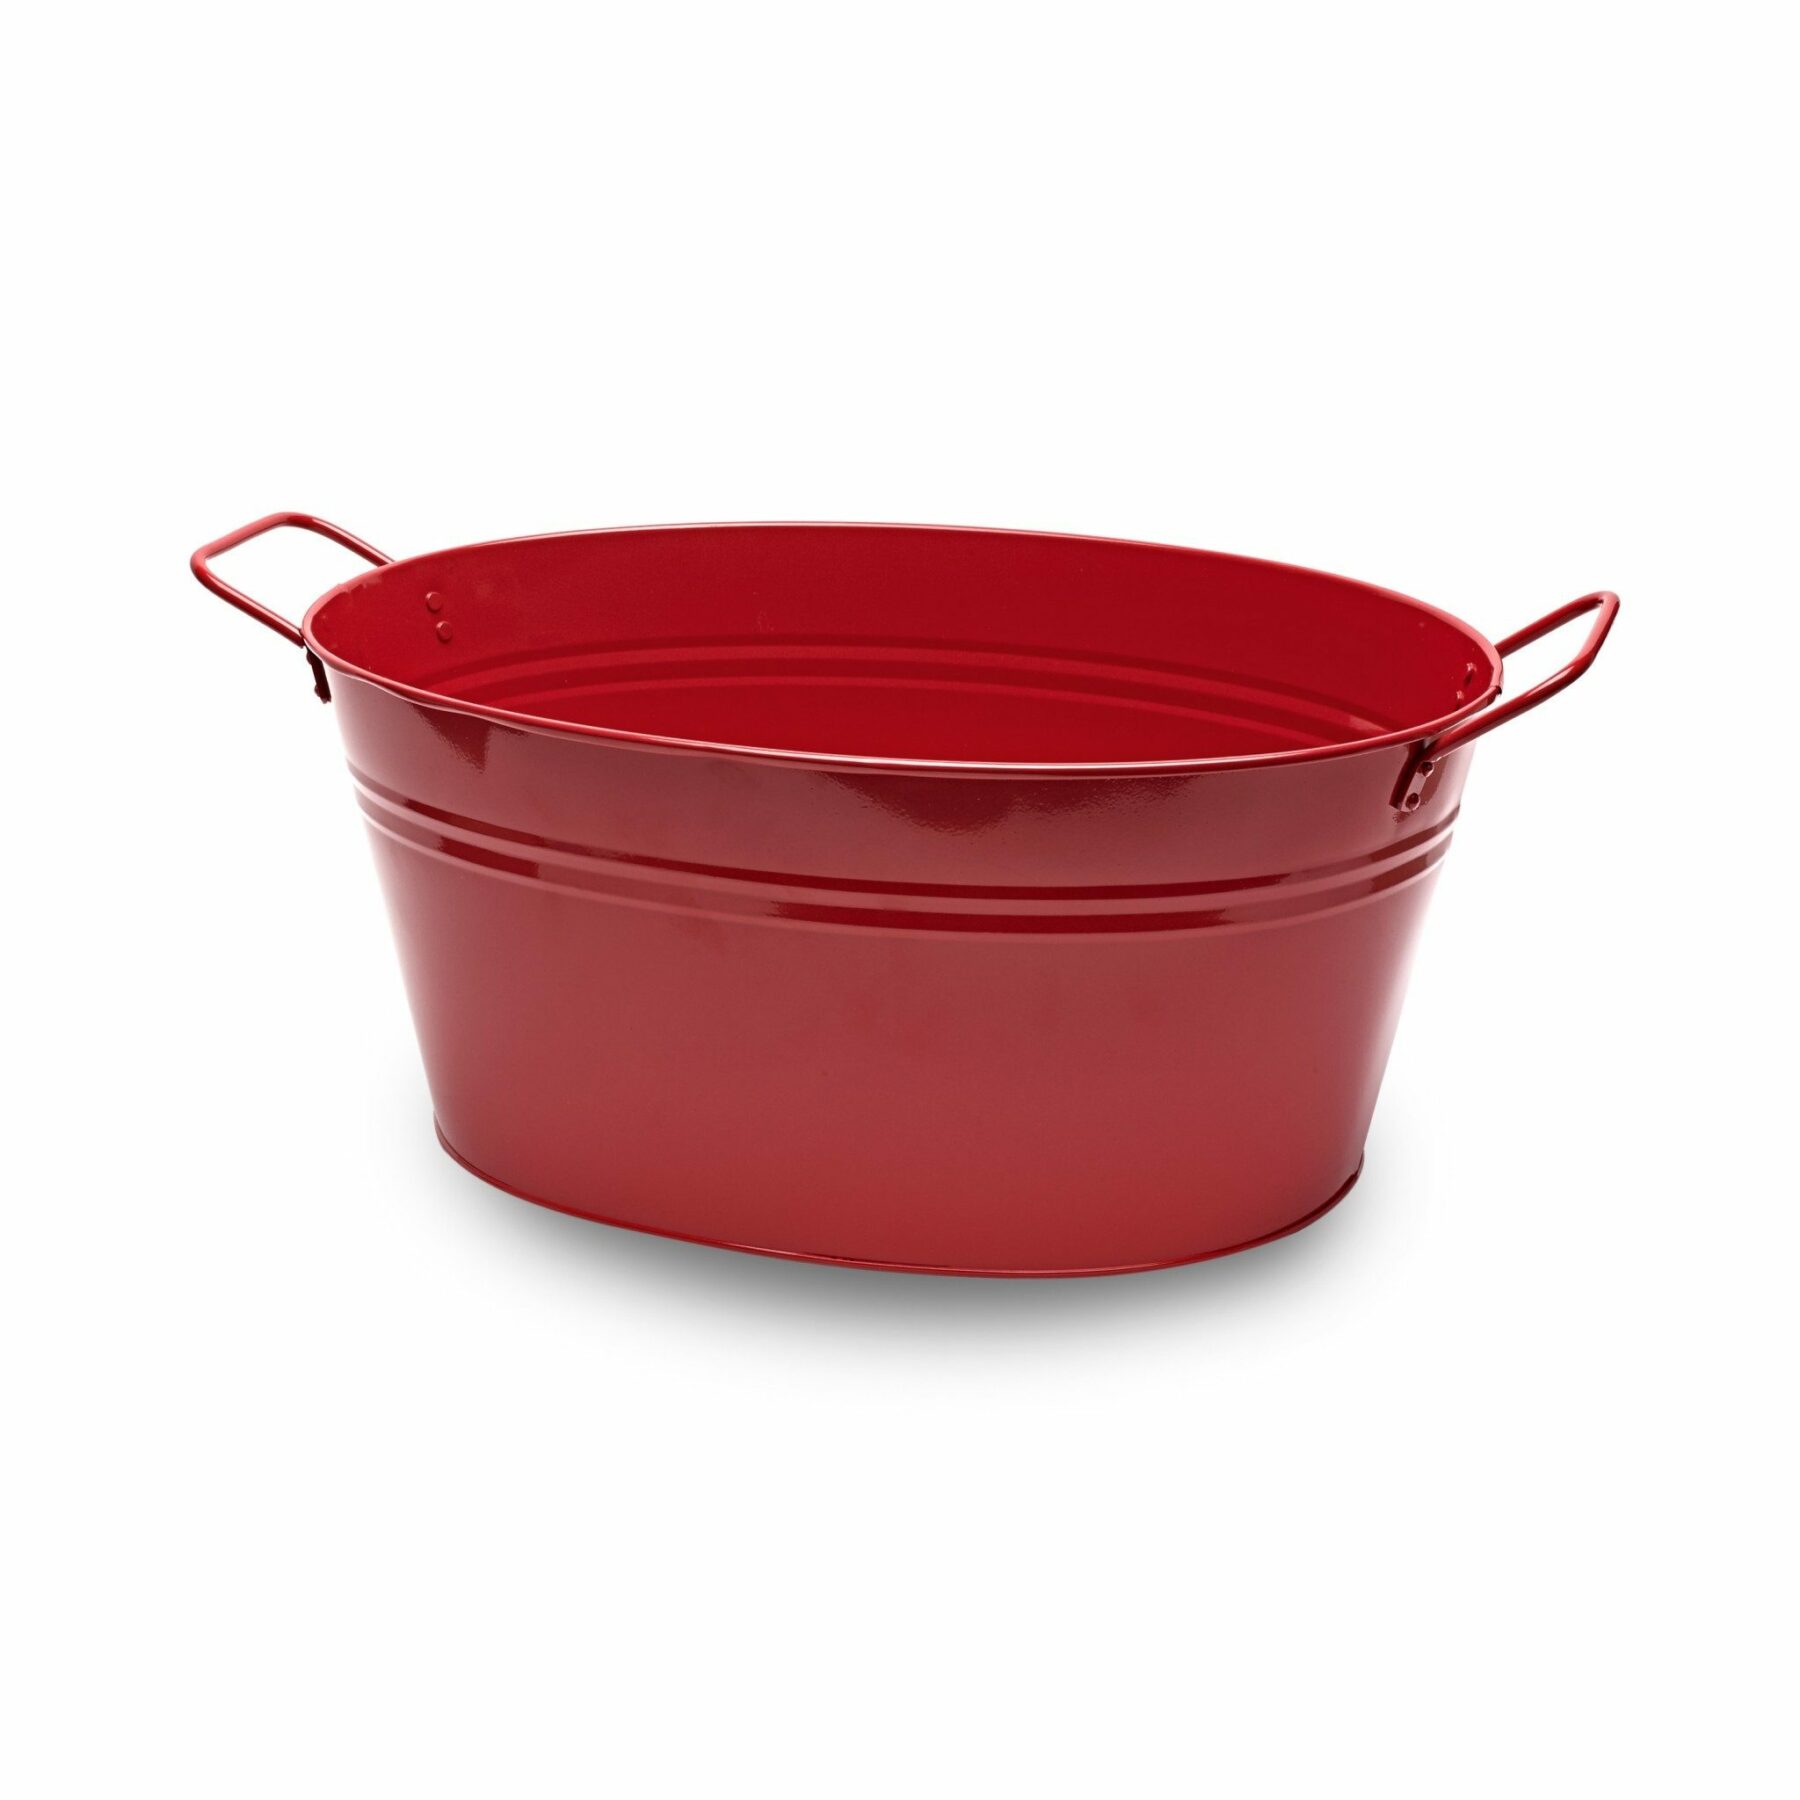 Large Oval Metal Tub - Red